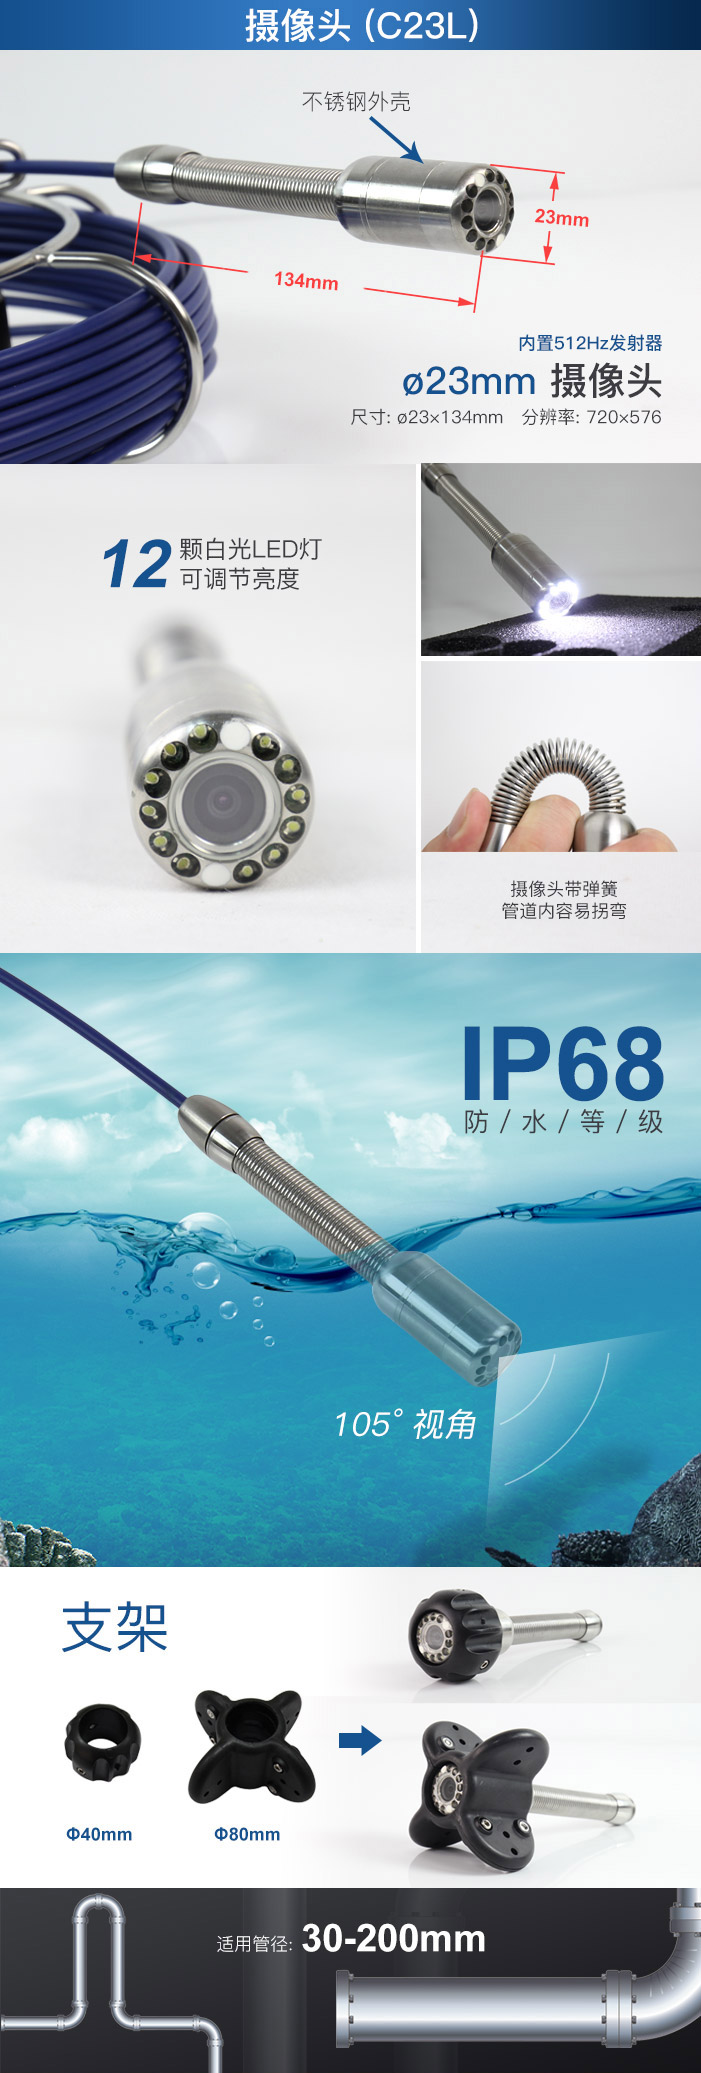 Water well inspection camera, Zhimin industrial product, home leak detection pipeline inspection